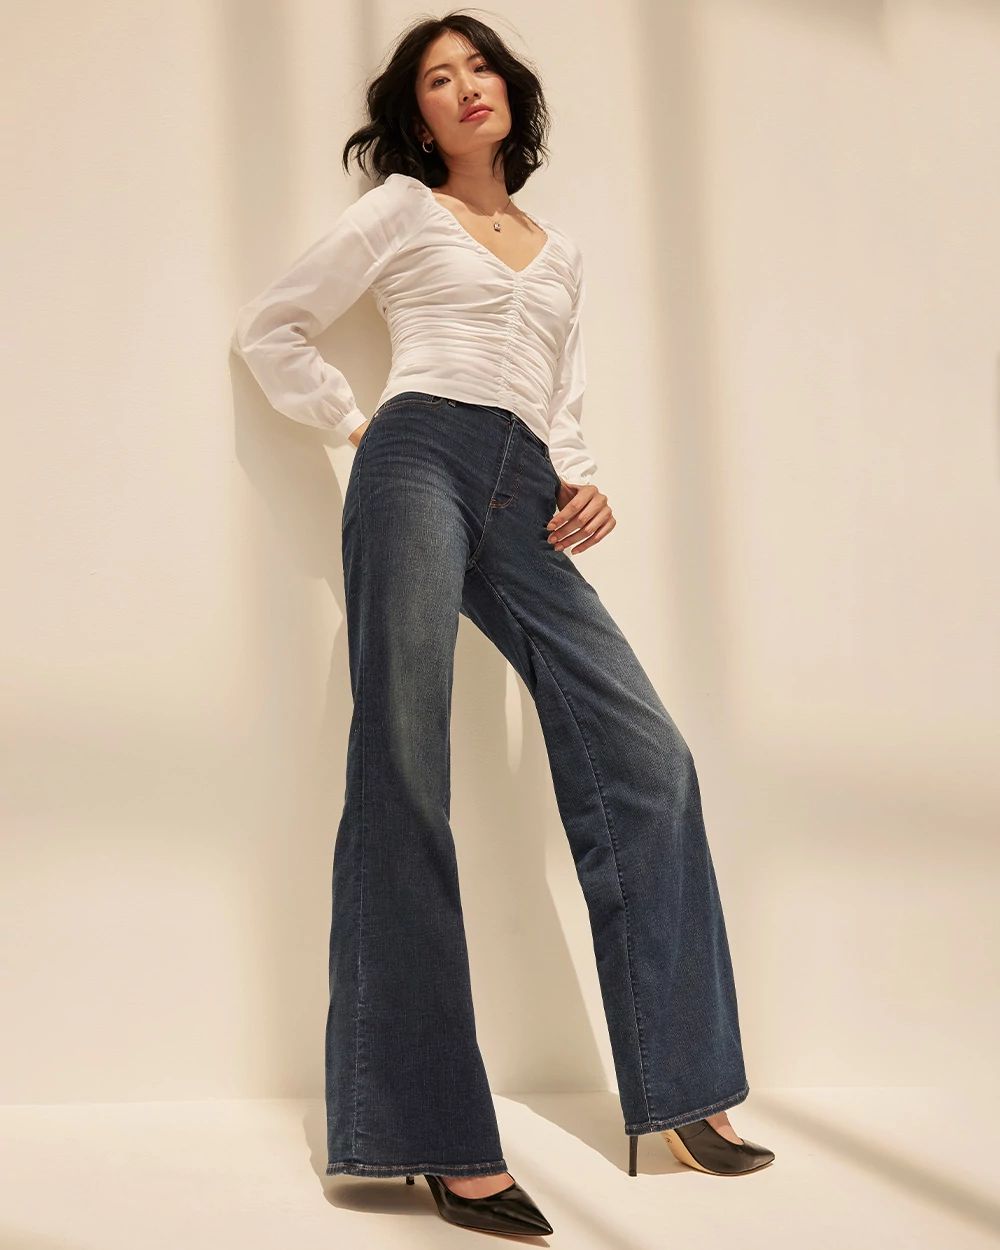 High-Rise Everyday Soft Wide Leg Jeans click to view larger image.